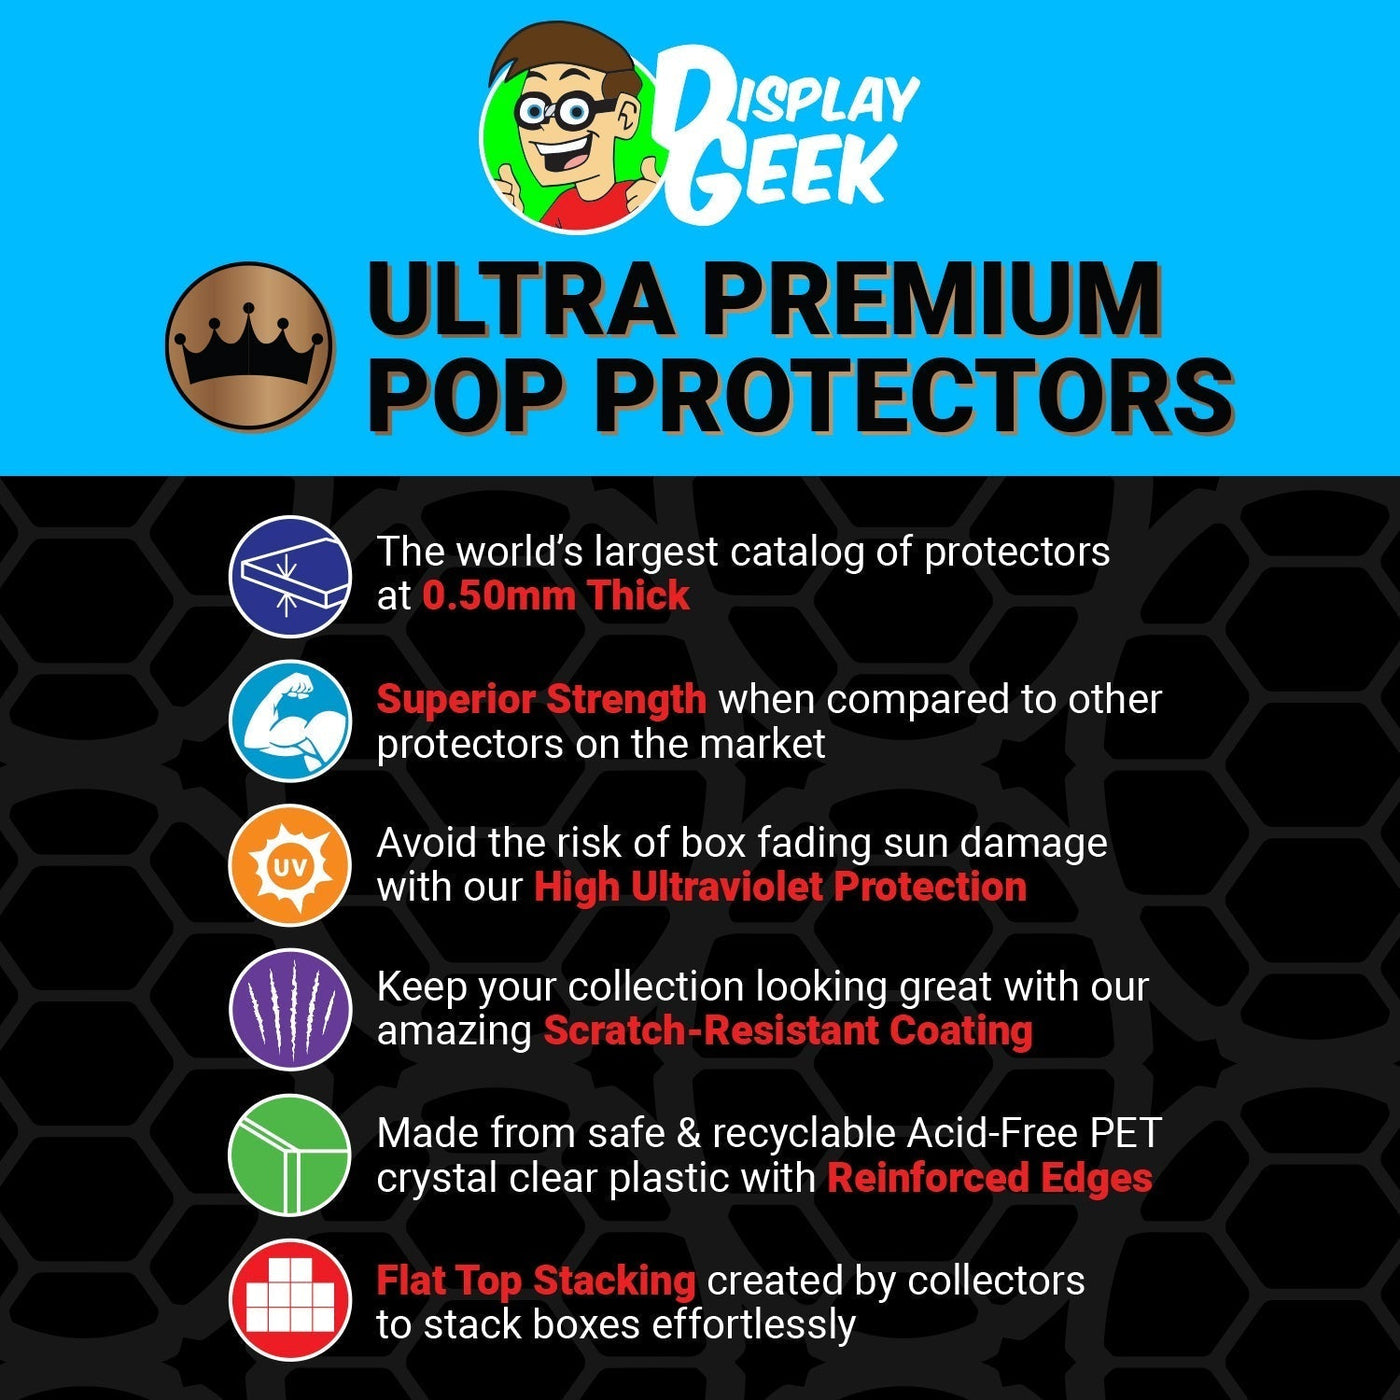 Pop Protector for Pop & Tee Black Panther Blacklight #891 Funko Box on The Protector Guide App by Display Geek